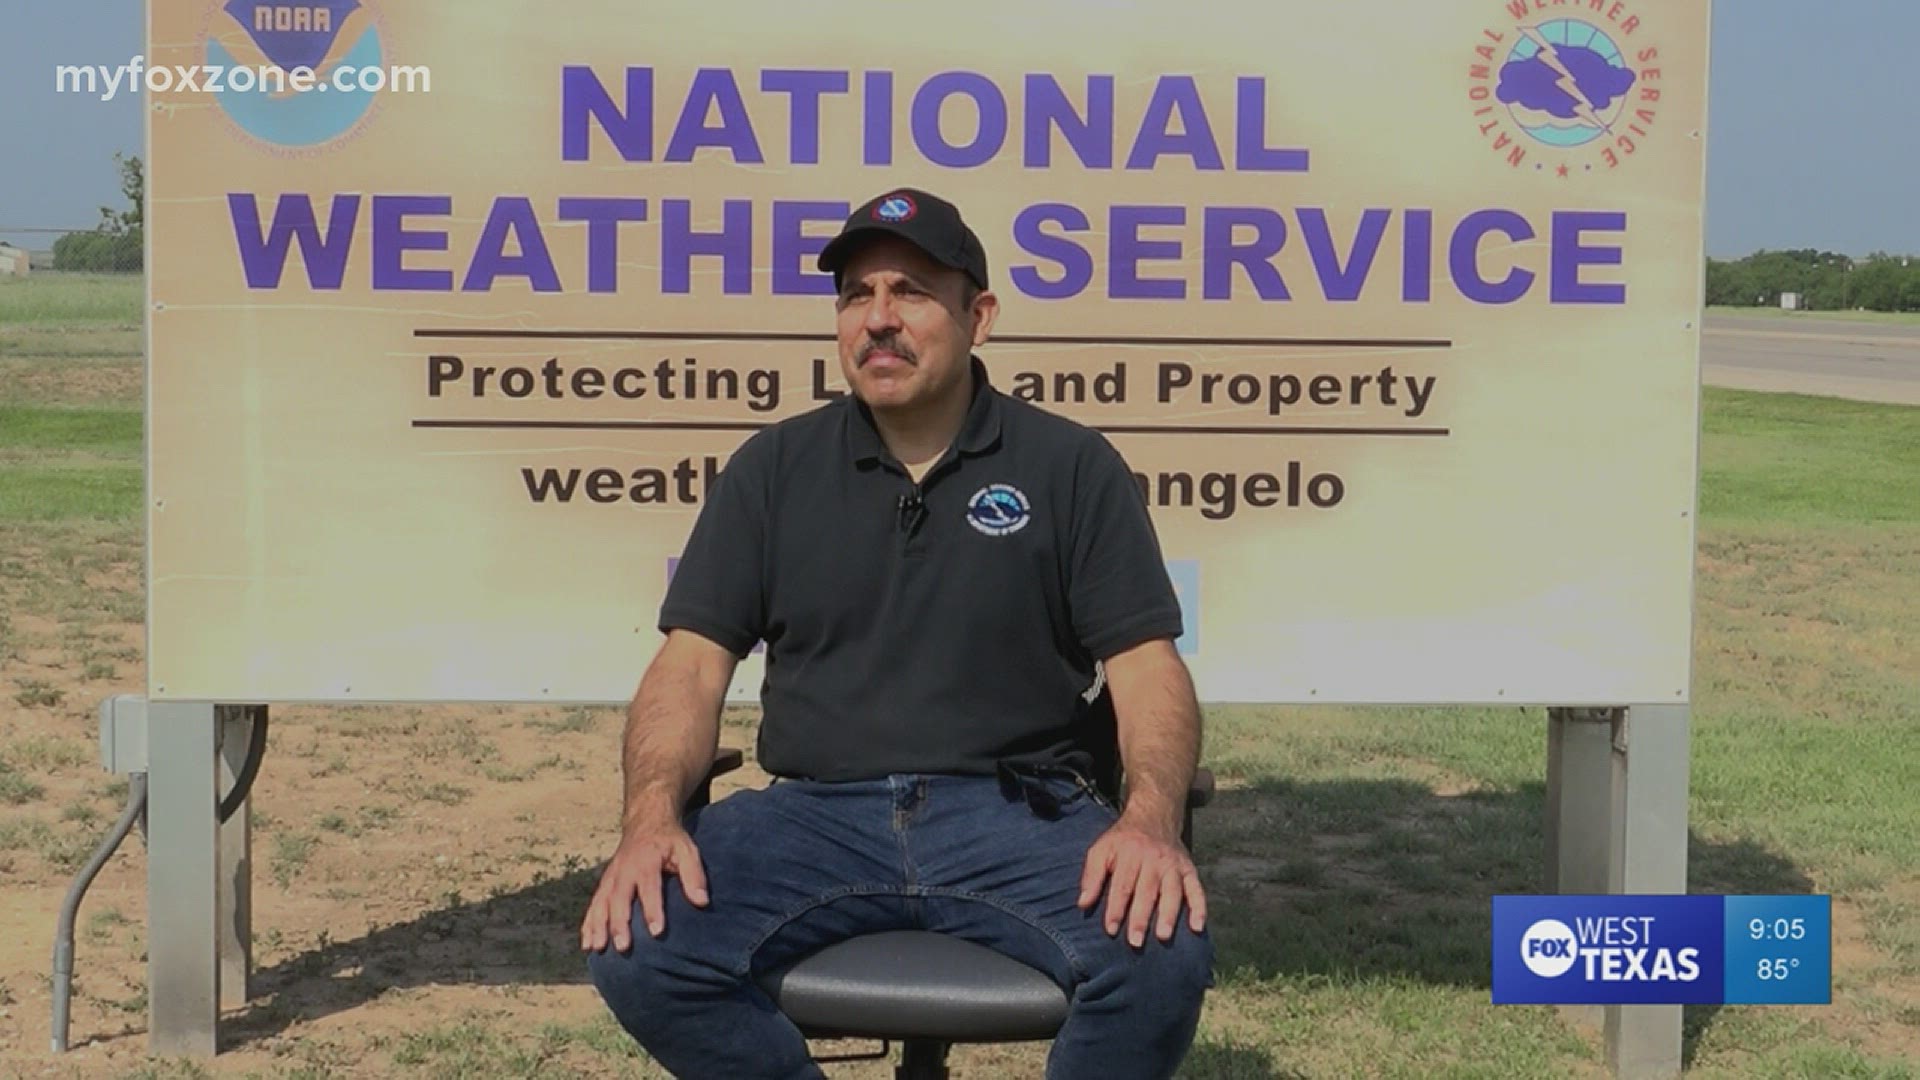 Warning Coordination Meteorologist Hector Guerrero is grateful for the time he’s been in West Texas and thanks the community for their trust.